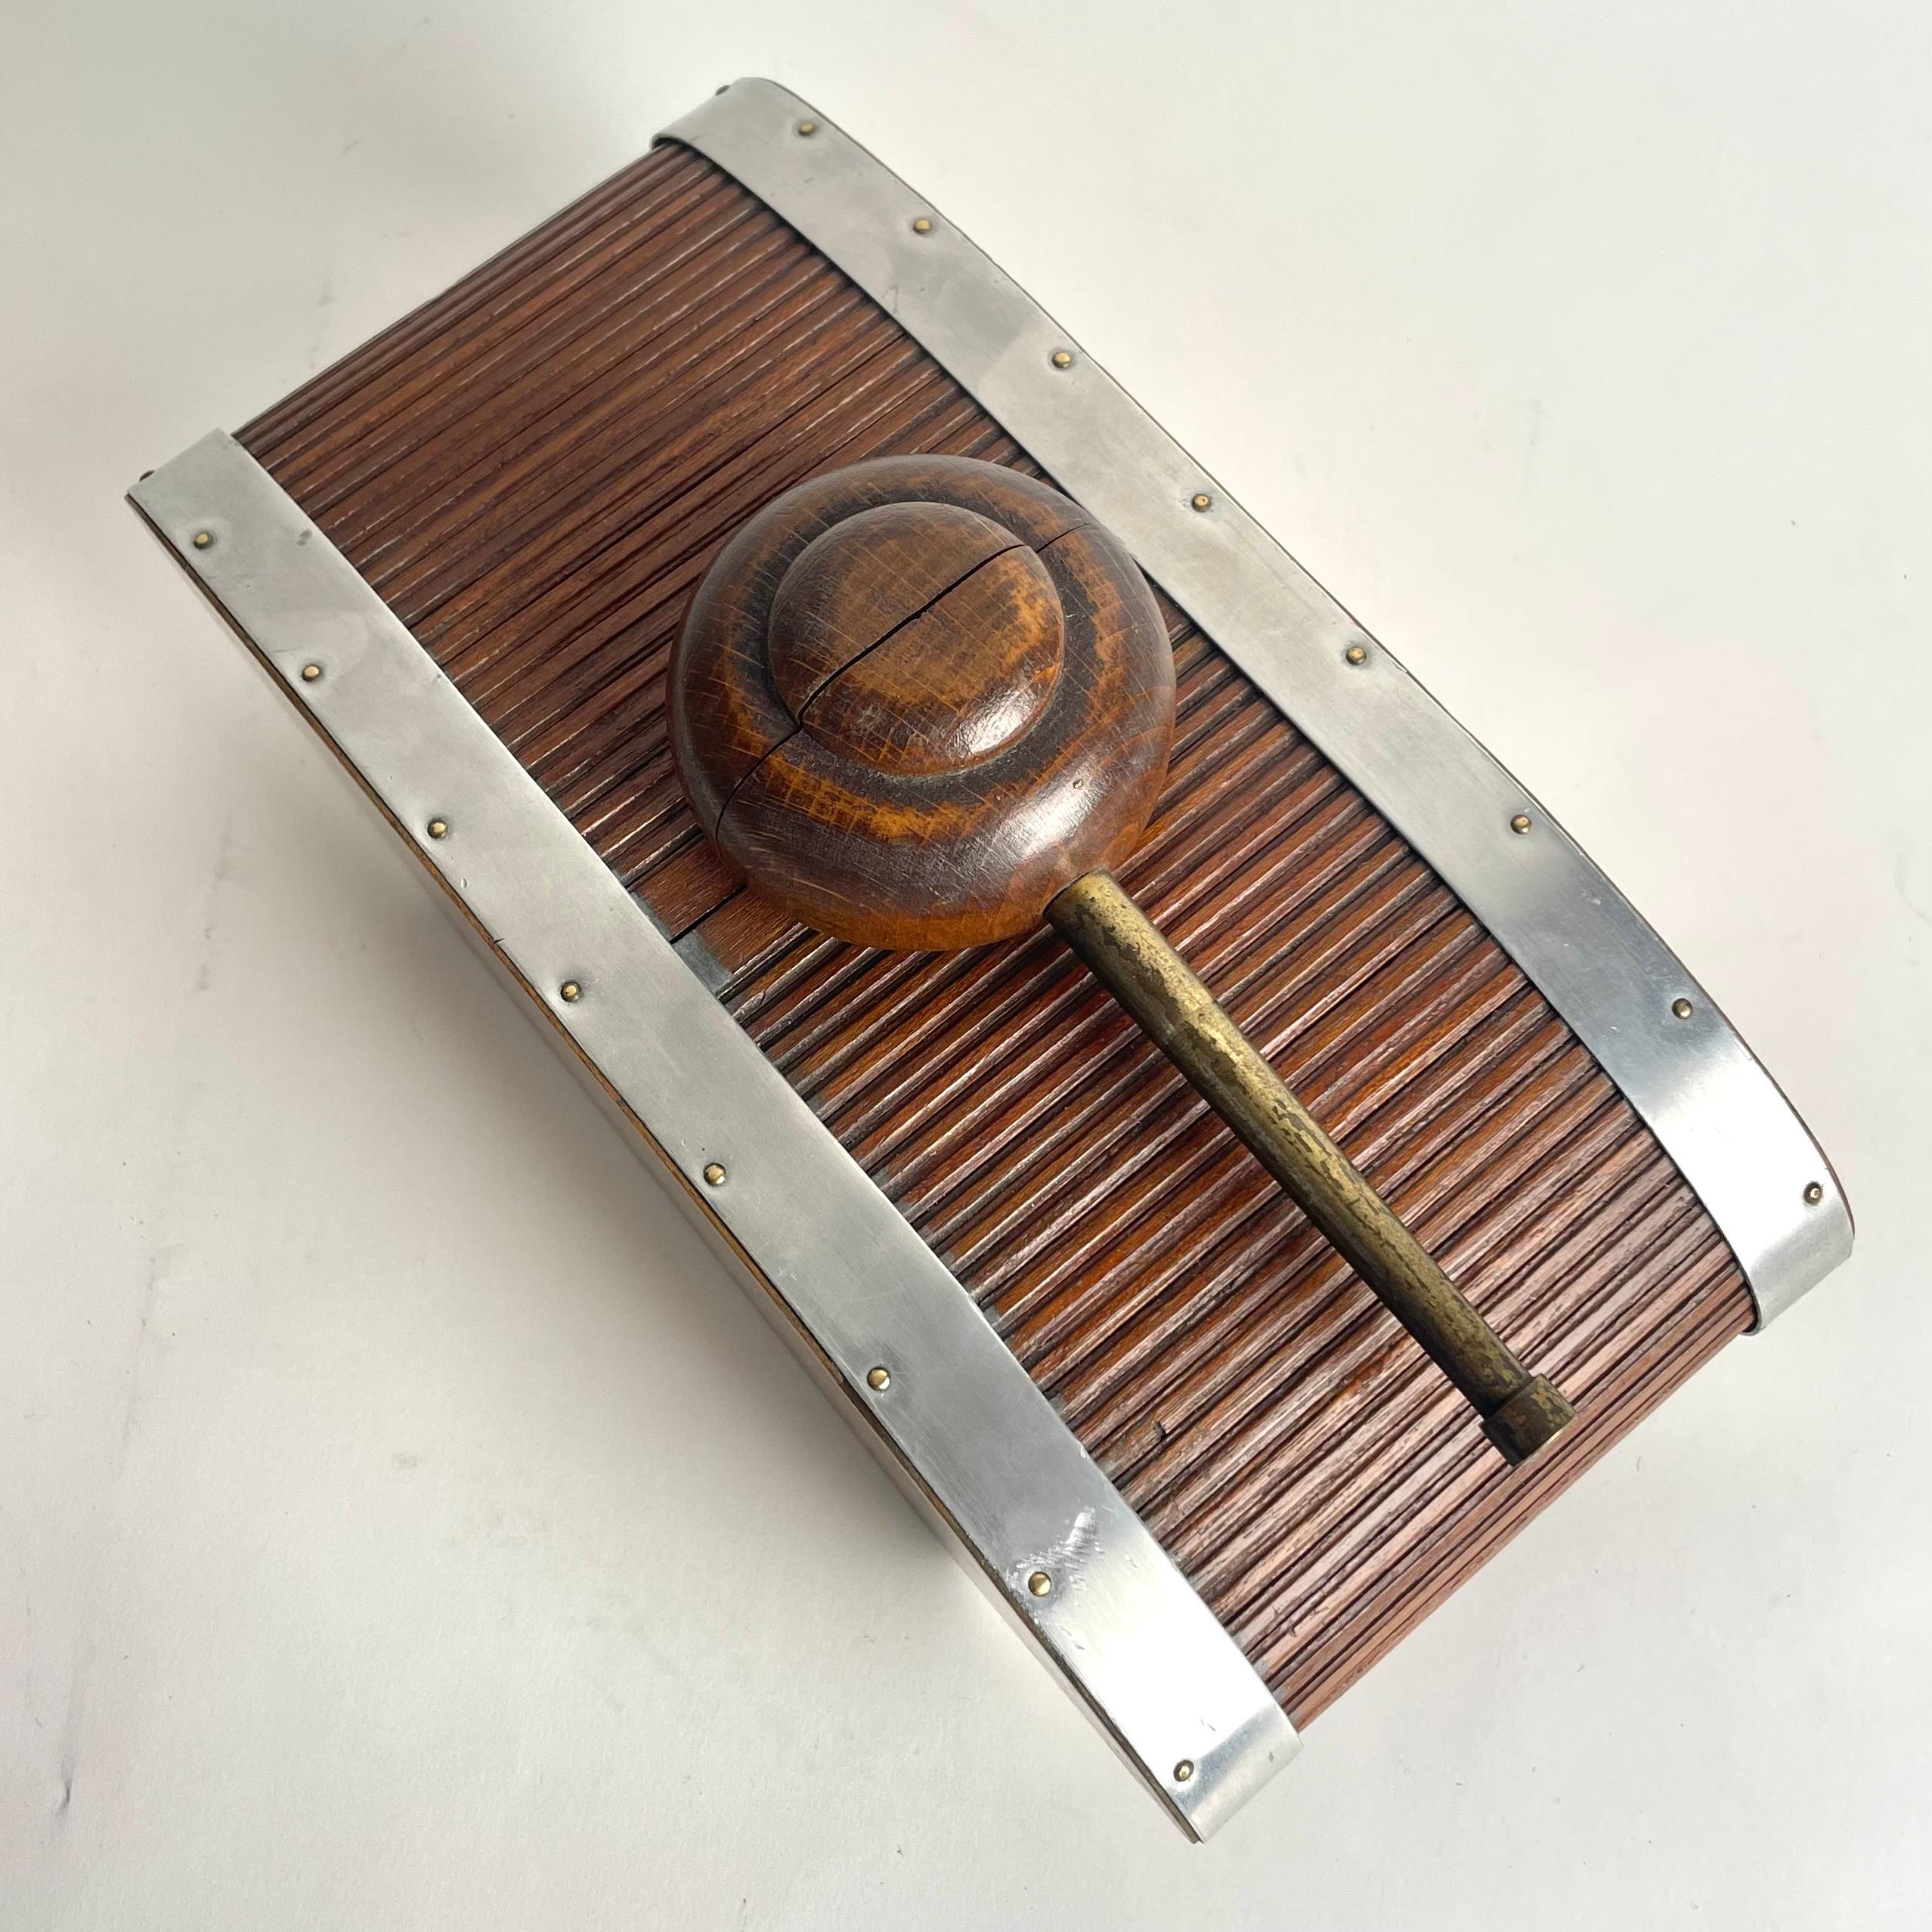 Decorative Cigar or Cigarette Box in the shape of a tank from the 1940s For Sale 1